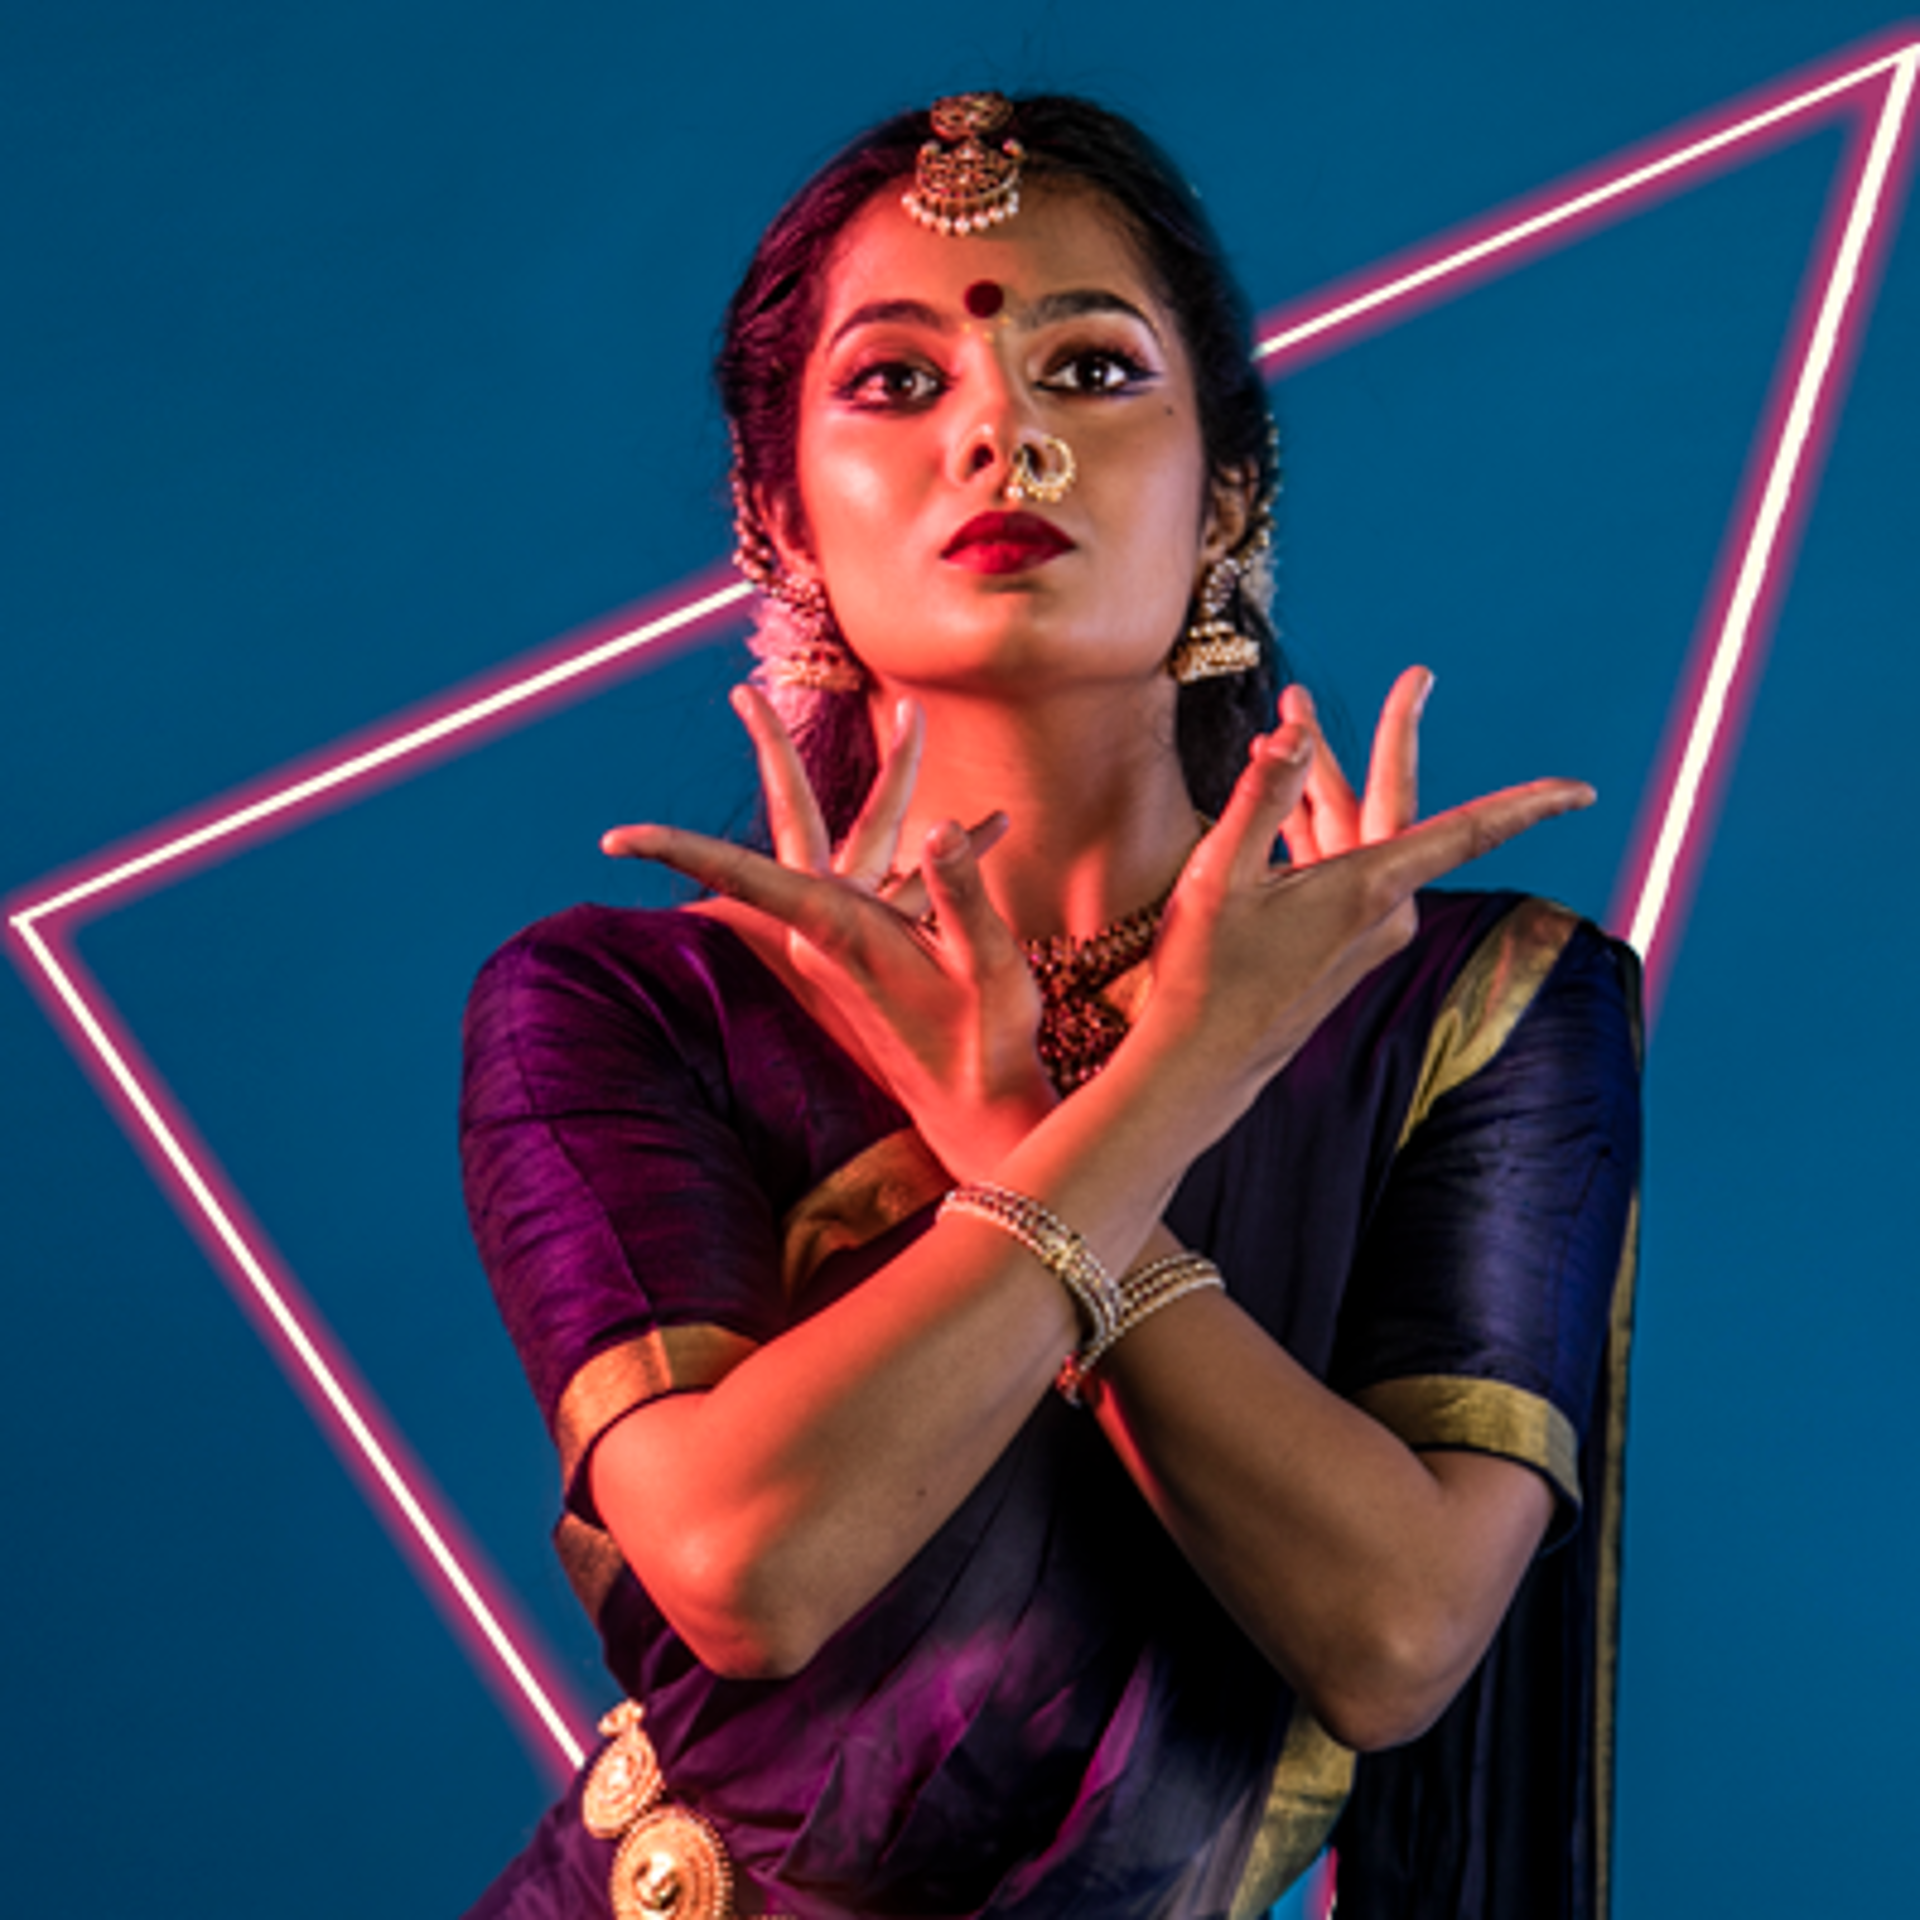 South Asian dancer holding both hands crossed over her chest and under her chin looking to the topof the screen. Wearing traditional purple dress with gold belt bracelets necklace and head jewlery with gold nose ring. Bright purple studio background.